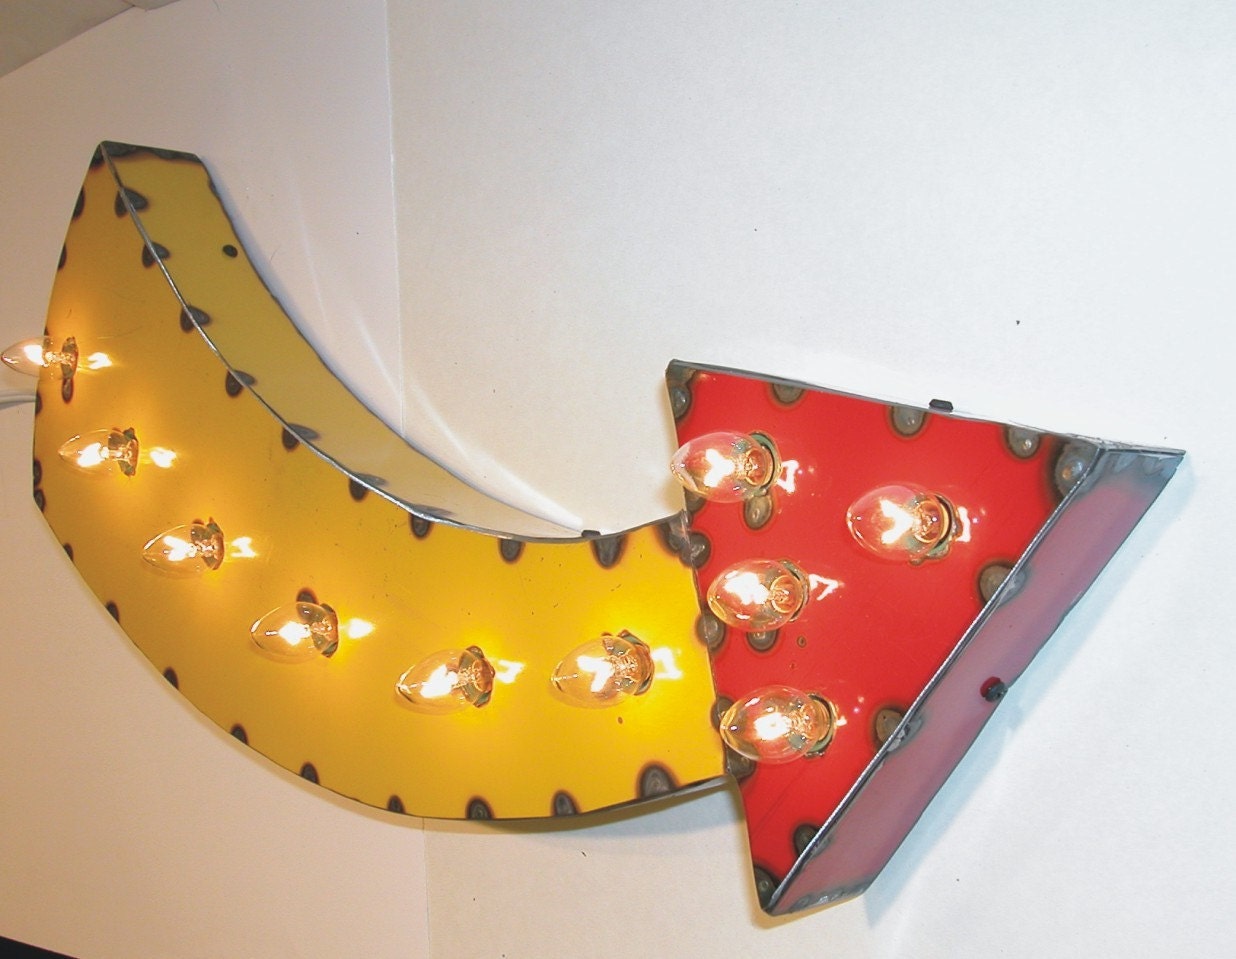 Yellow Arrow Vintage Industrial Metal Sign Letters & Lights - MLevin